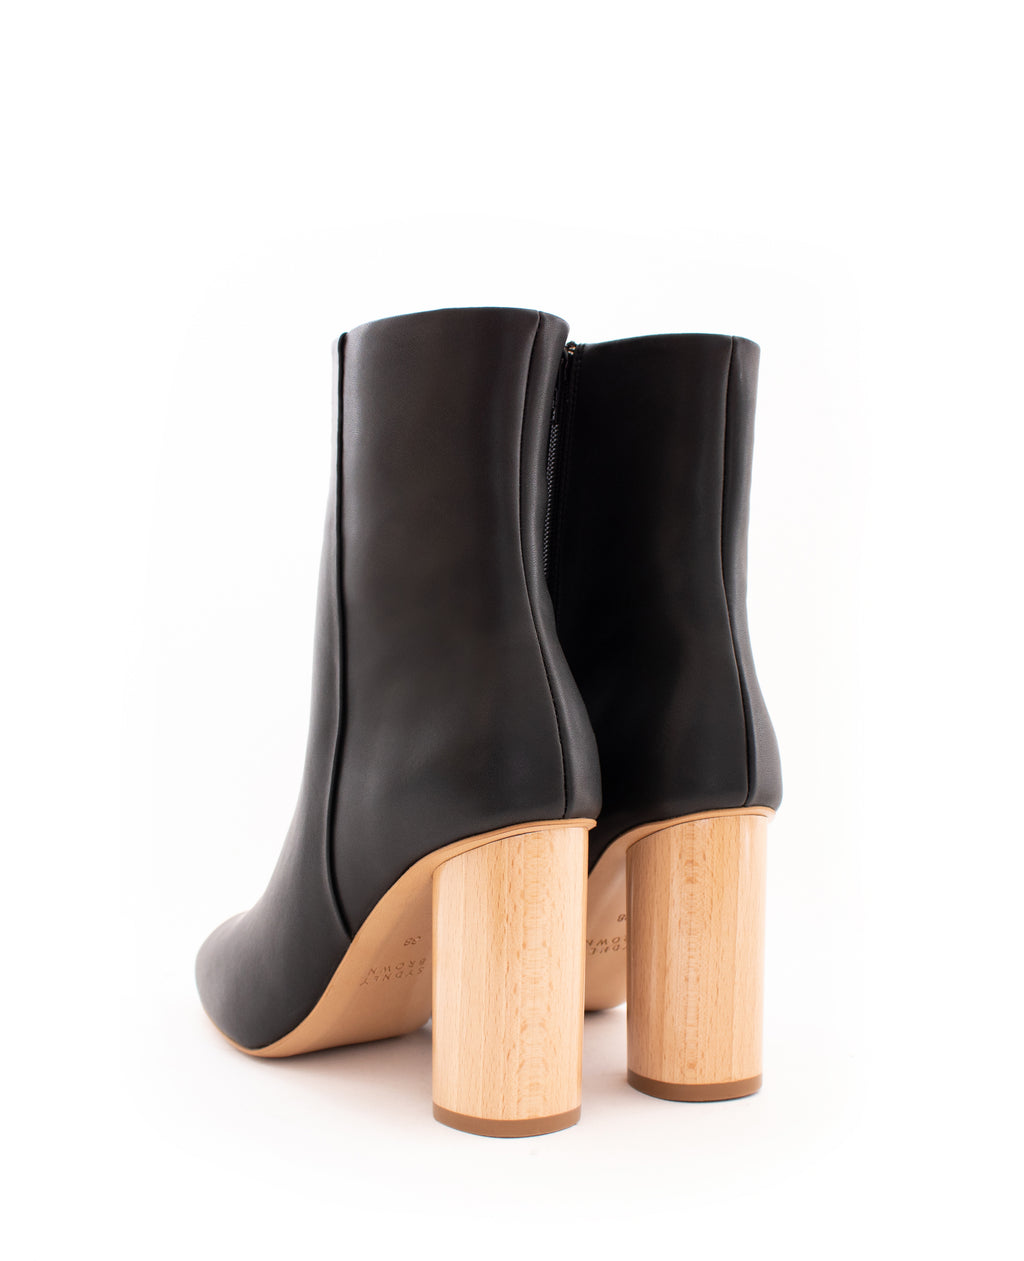 High ankle boot in black eco vegan leather, high heel in natural wood, side zipper.